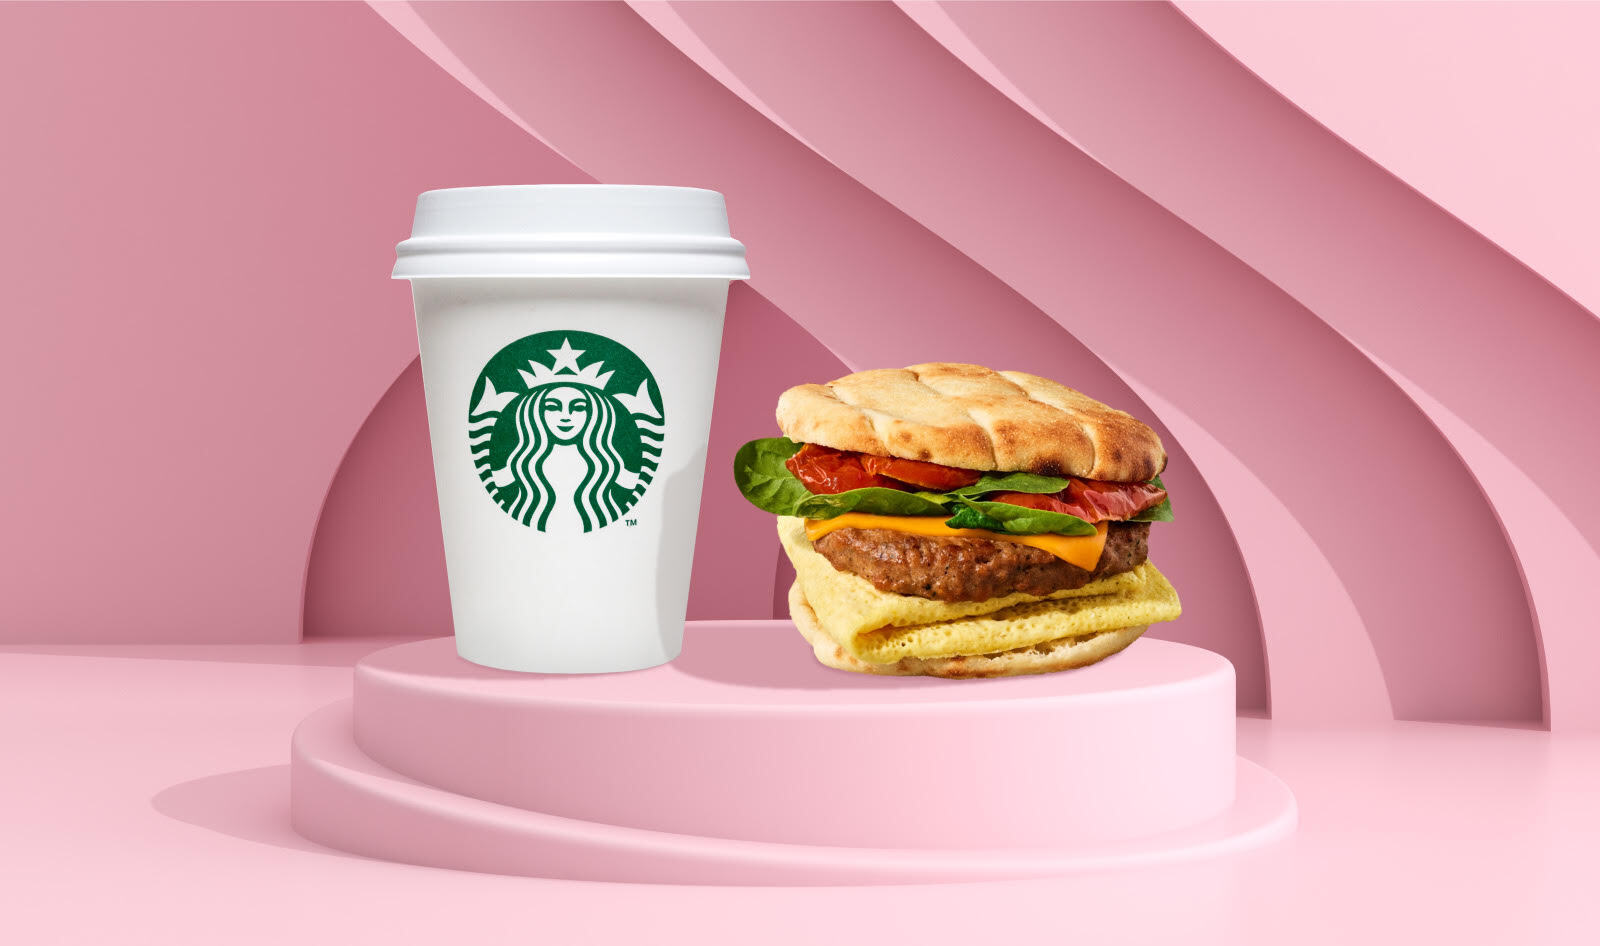 Starbucks Makes $1 Billion Investment in AI To Help Figure Out Vegan Breakfast Sandwiches